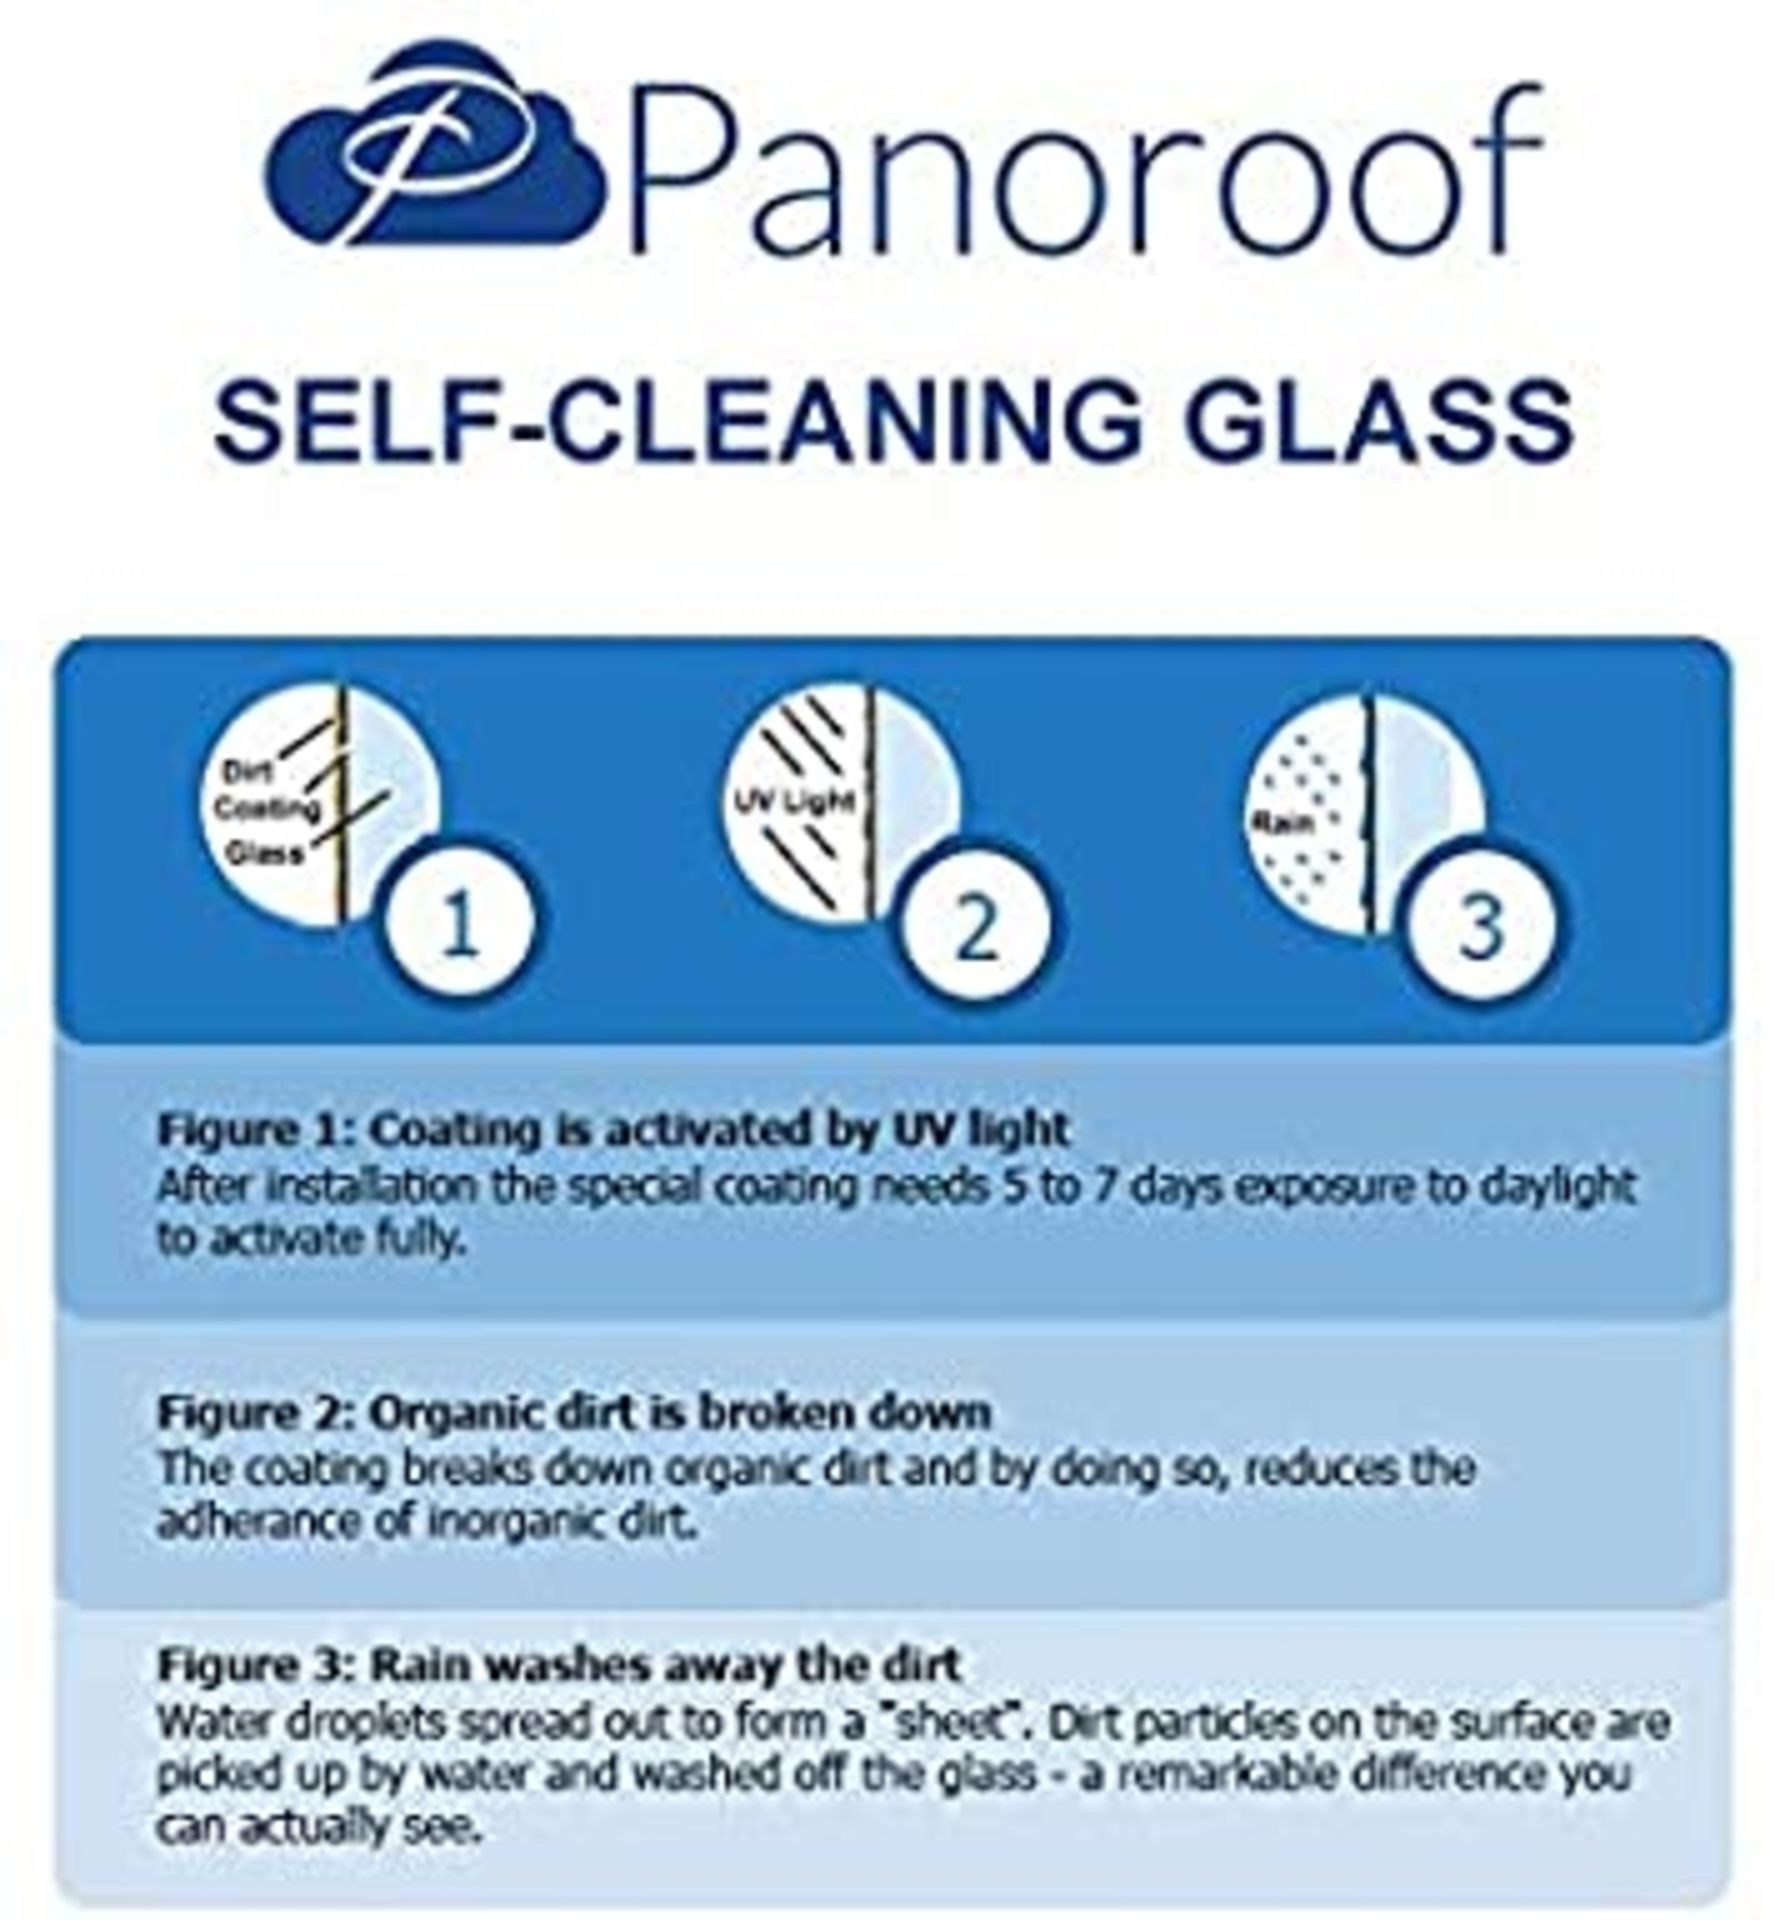 """Panoroof Triple Glazed Self Cleaning 800x2000mm (inside Size Visable glass area) Seamless Glass - Image 6 of 6